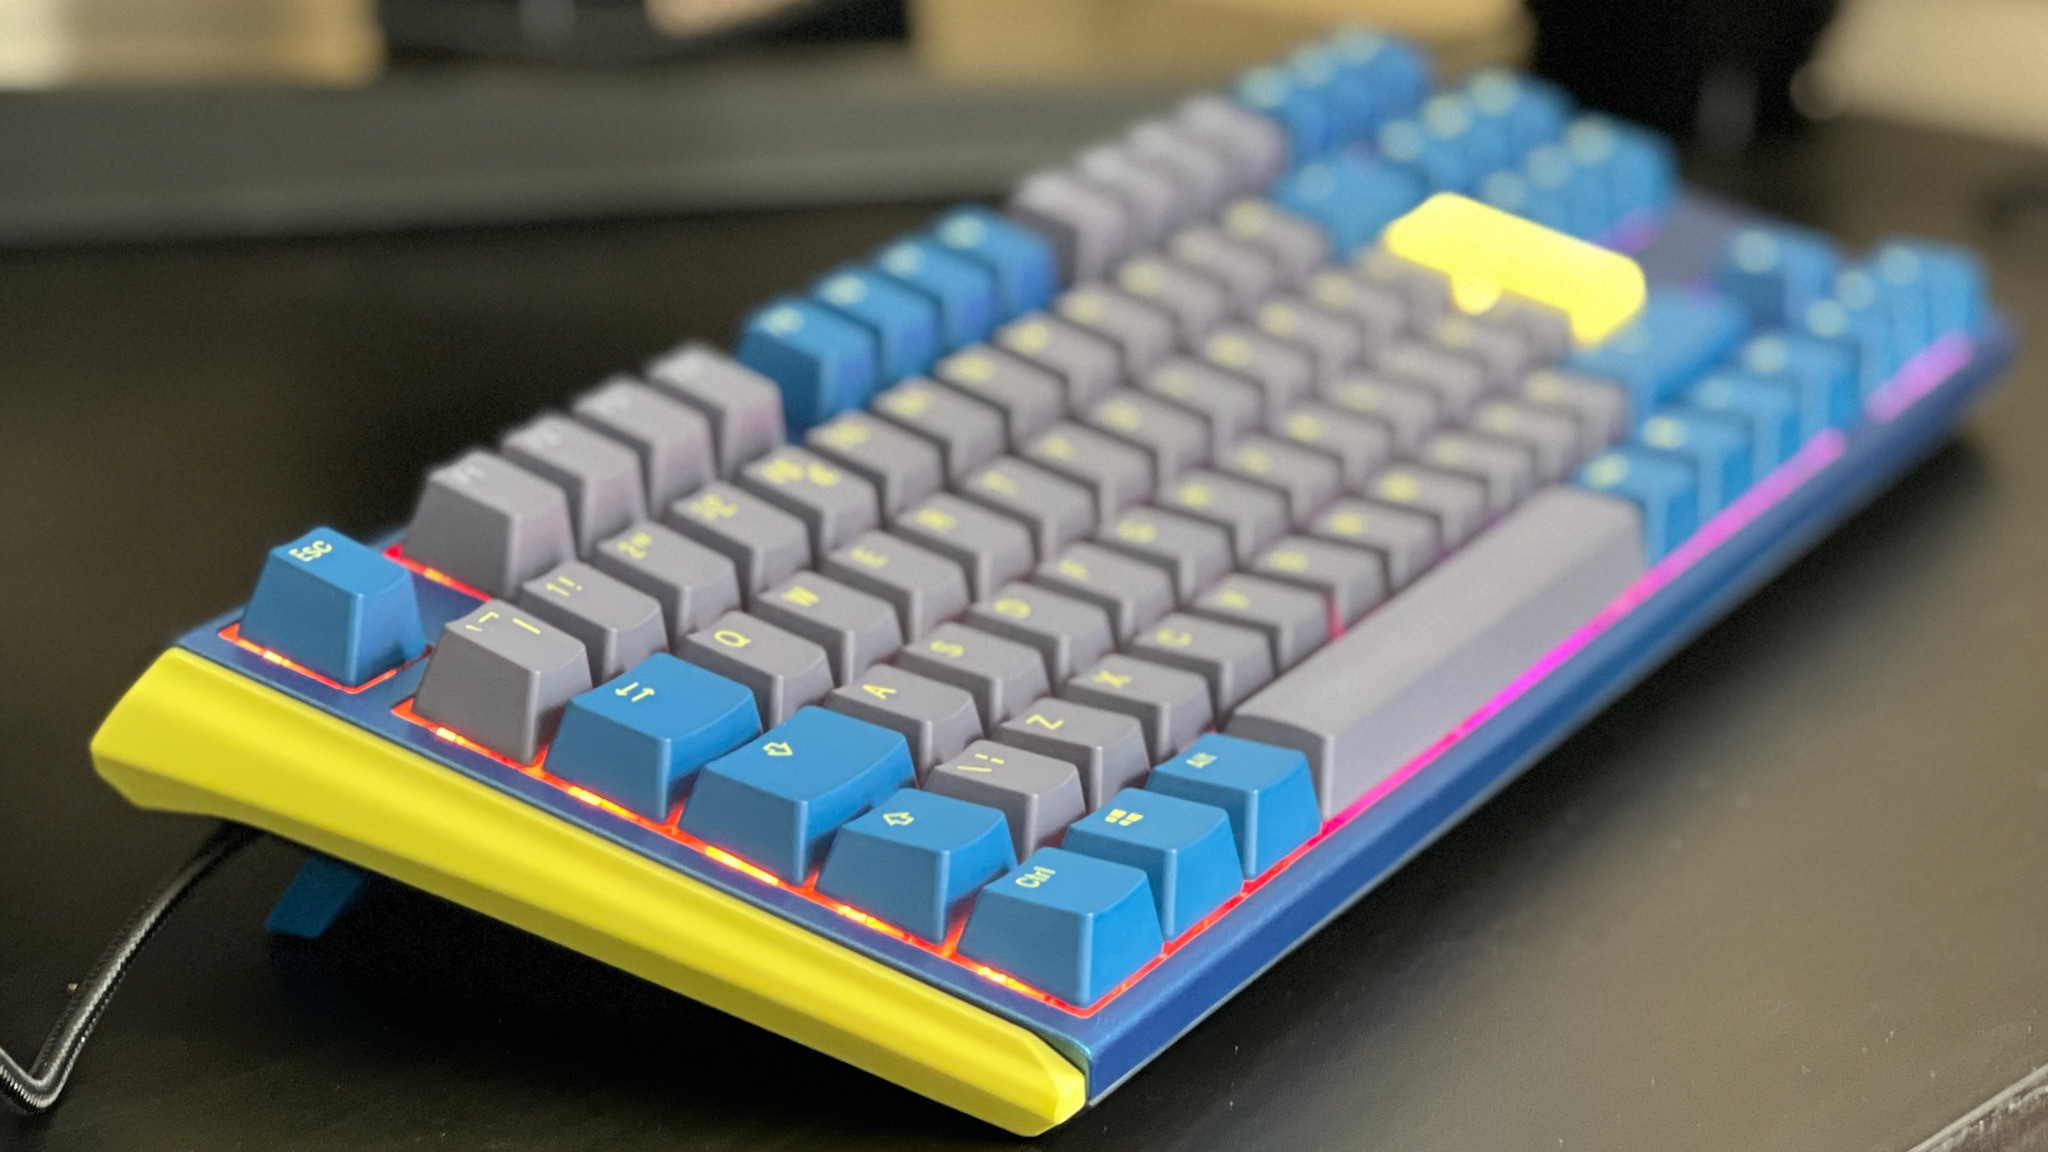 Ducky One 3 review: a gaming keyboard built to look and feel great